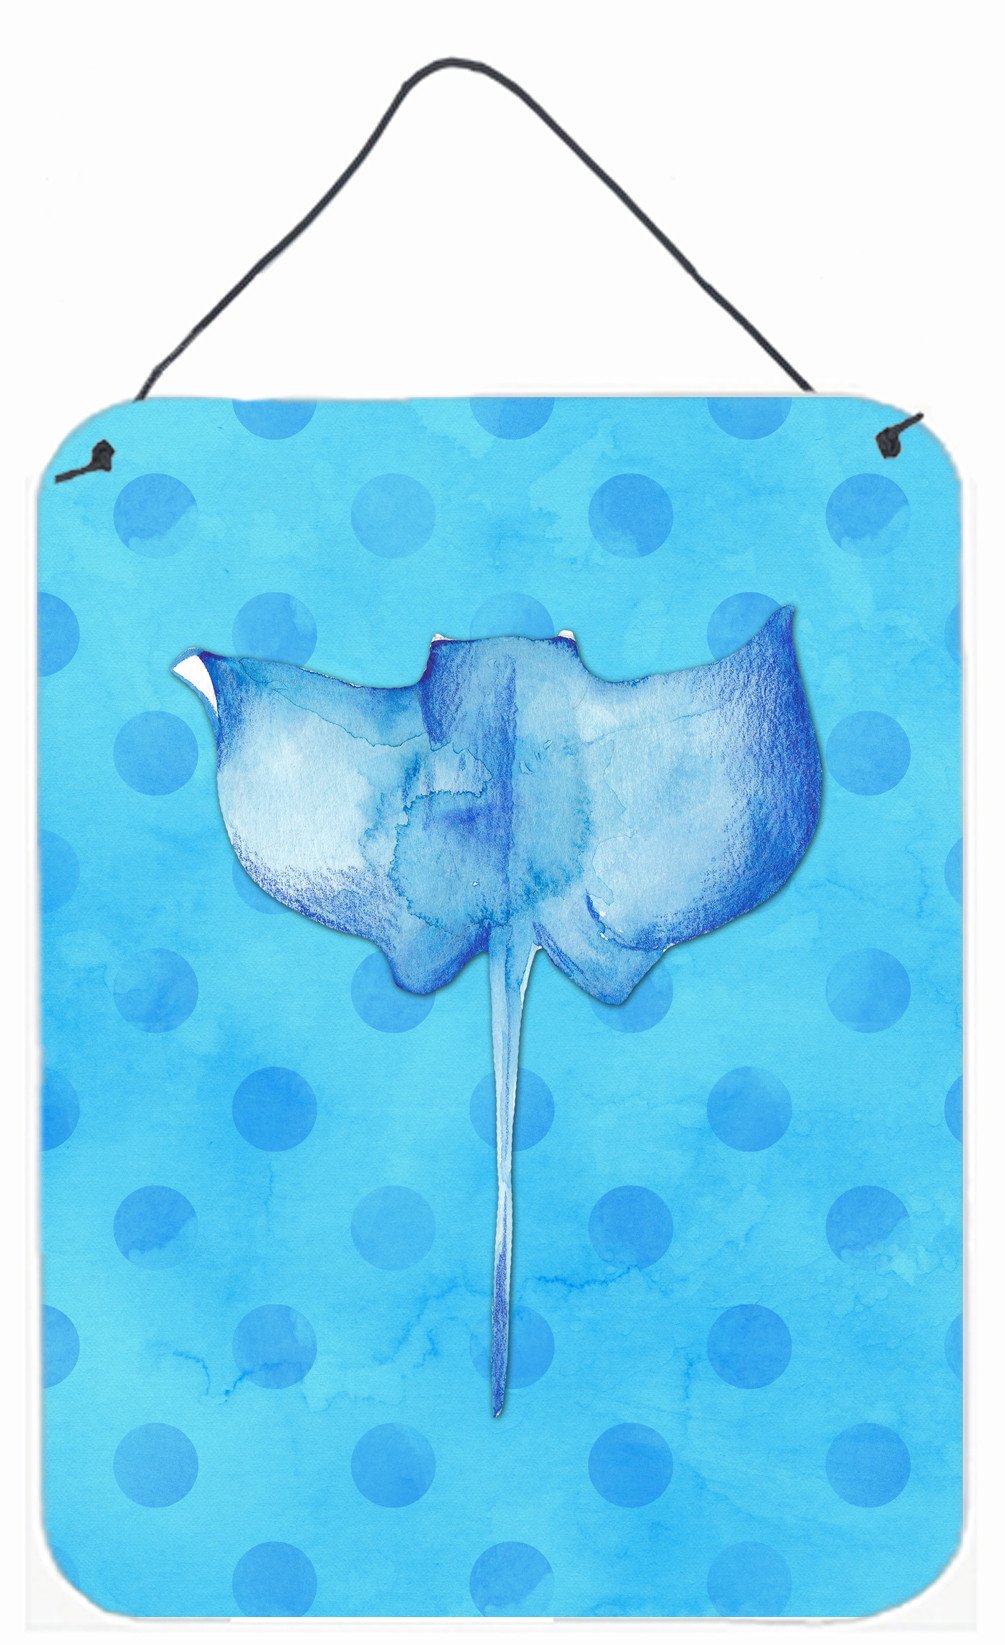 Sting Ray Blue Polkadot Wall or Door Hanging Prints BB8236DS1216 by Caroline's Treasures